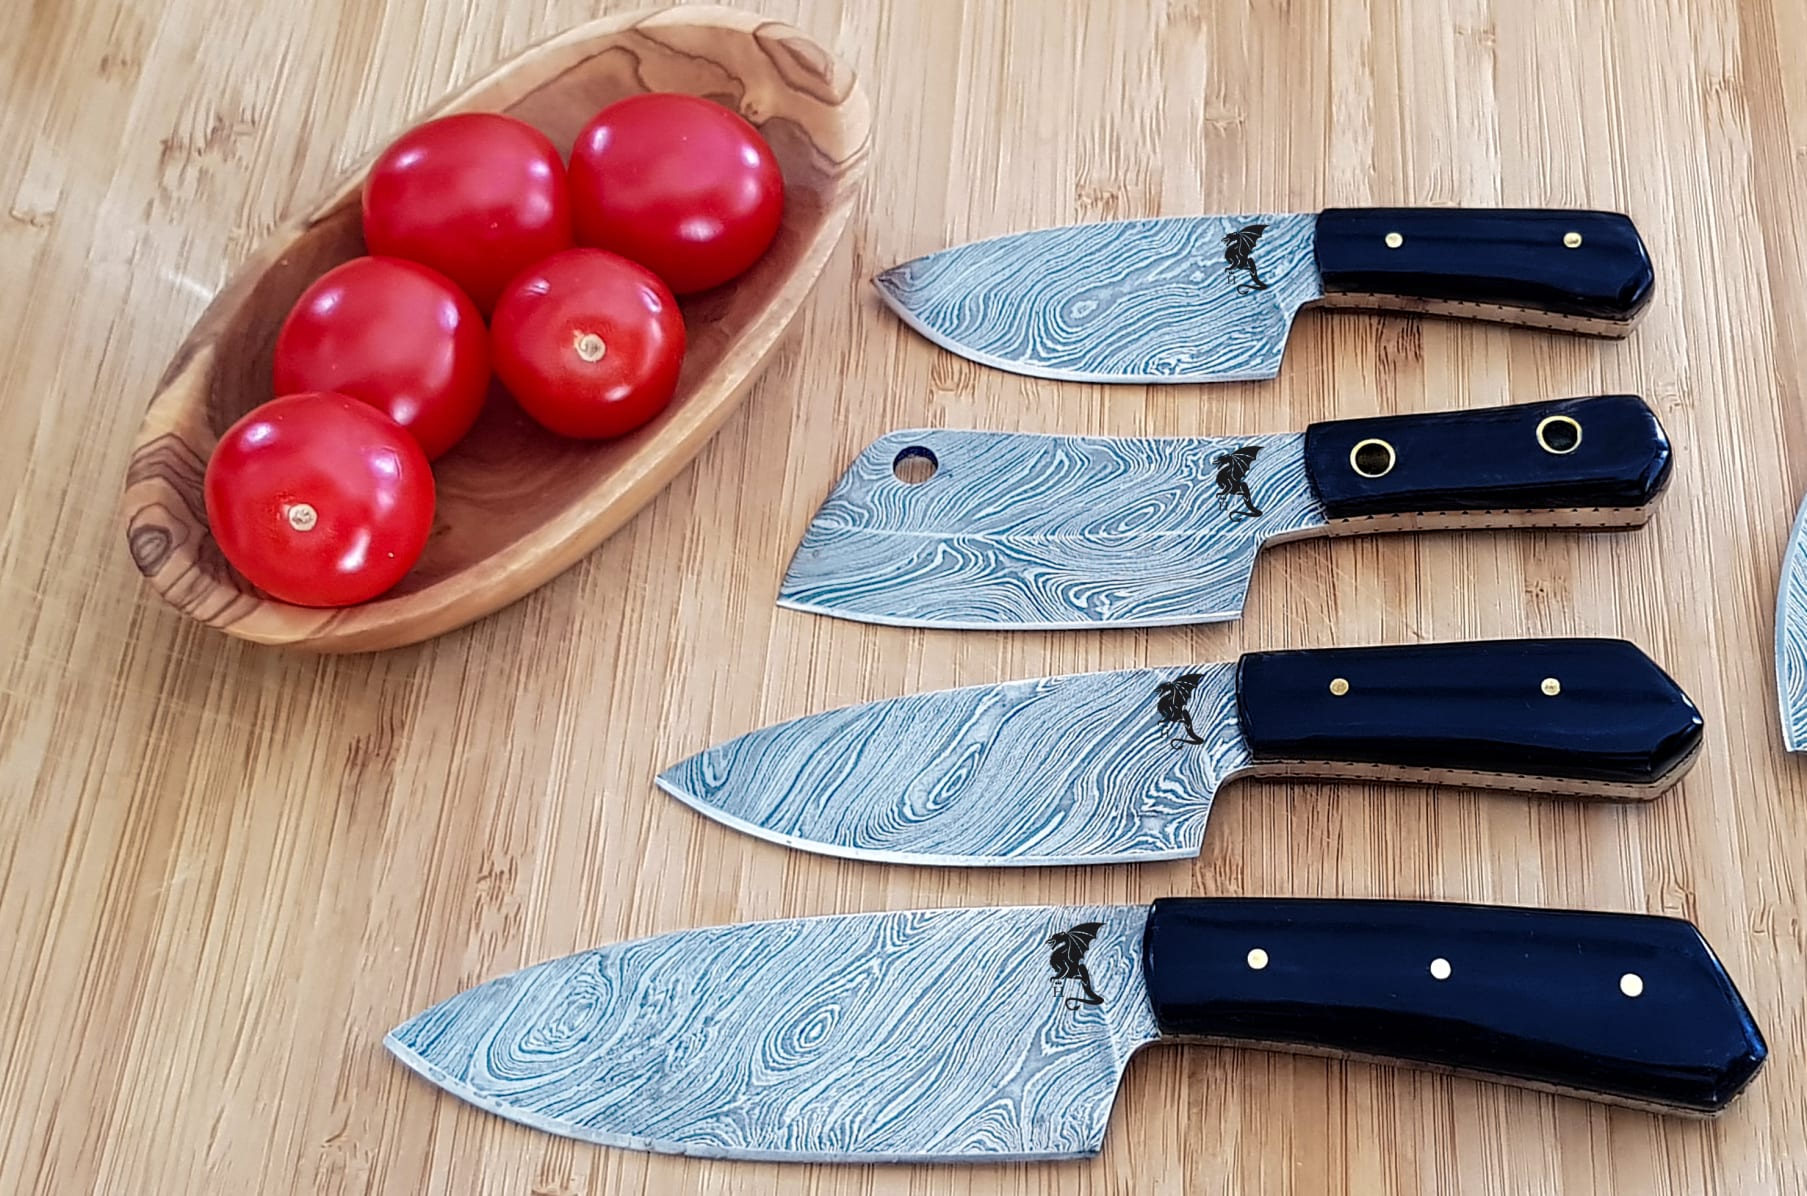 Mini 1.5 - Worlds smallest Chef Knife Set for you!